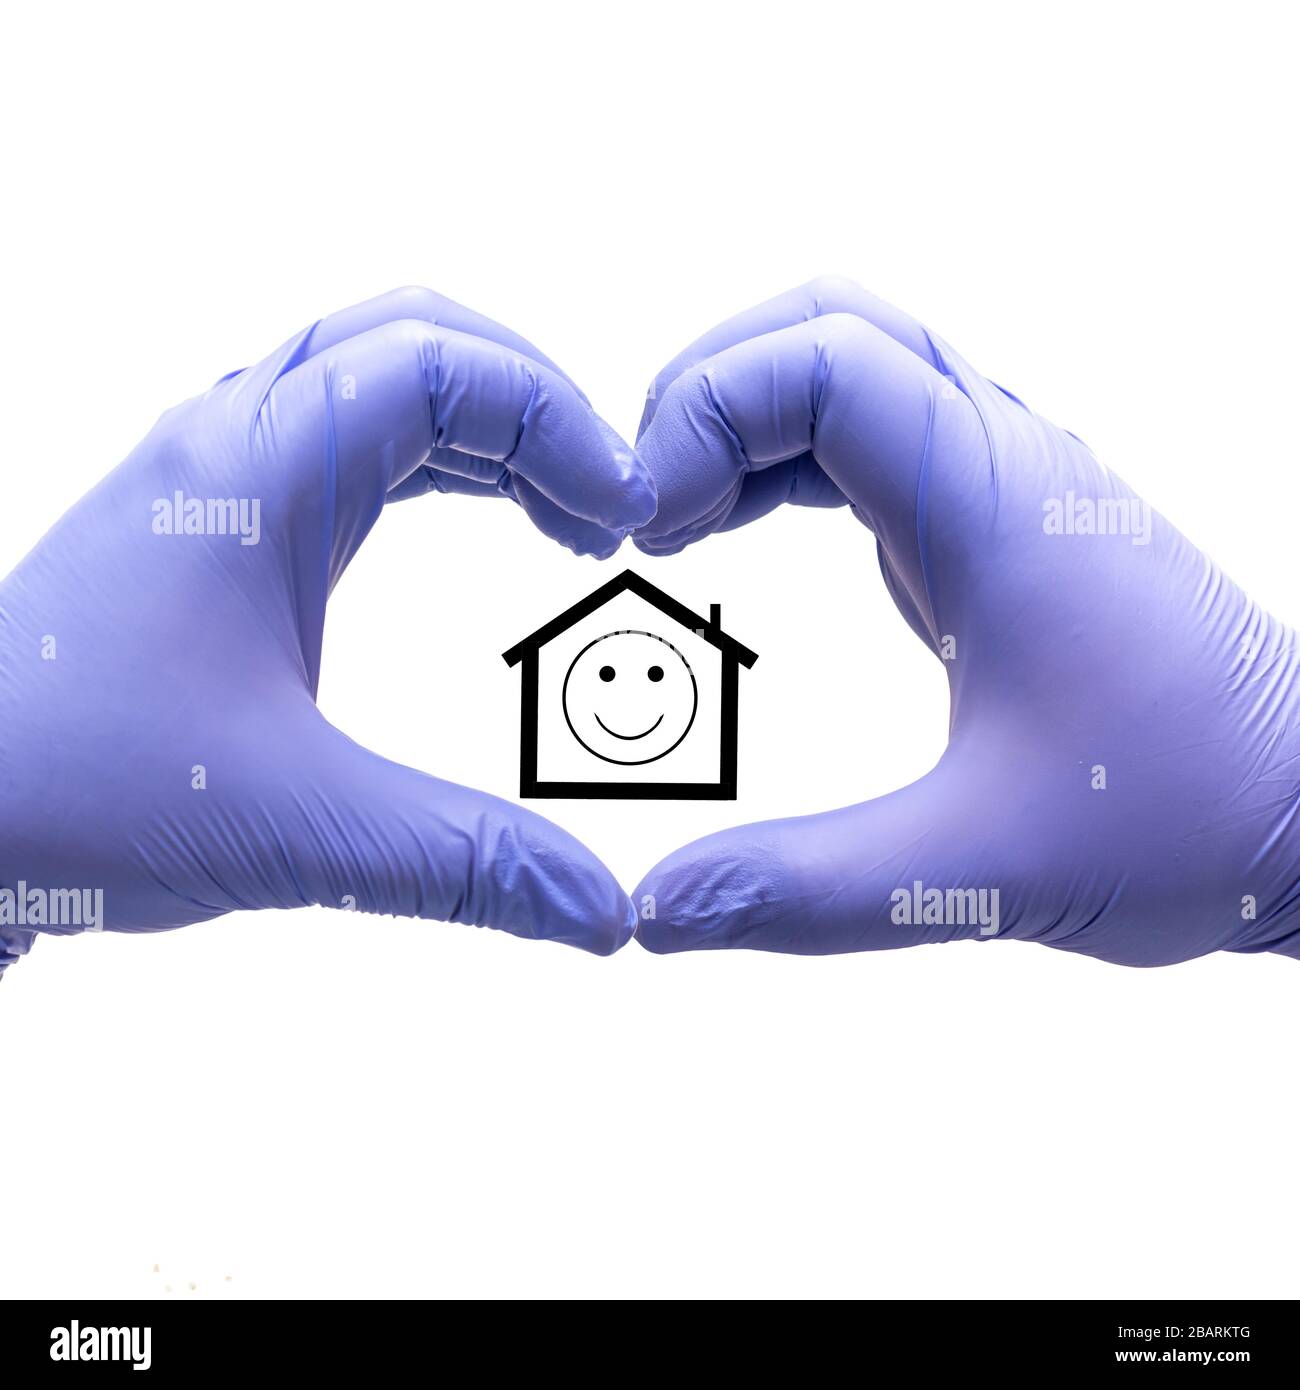 Love signs from hand with medical gloves. Stay home  fighting the coronavirus pandemic. Stock Photo